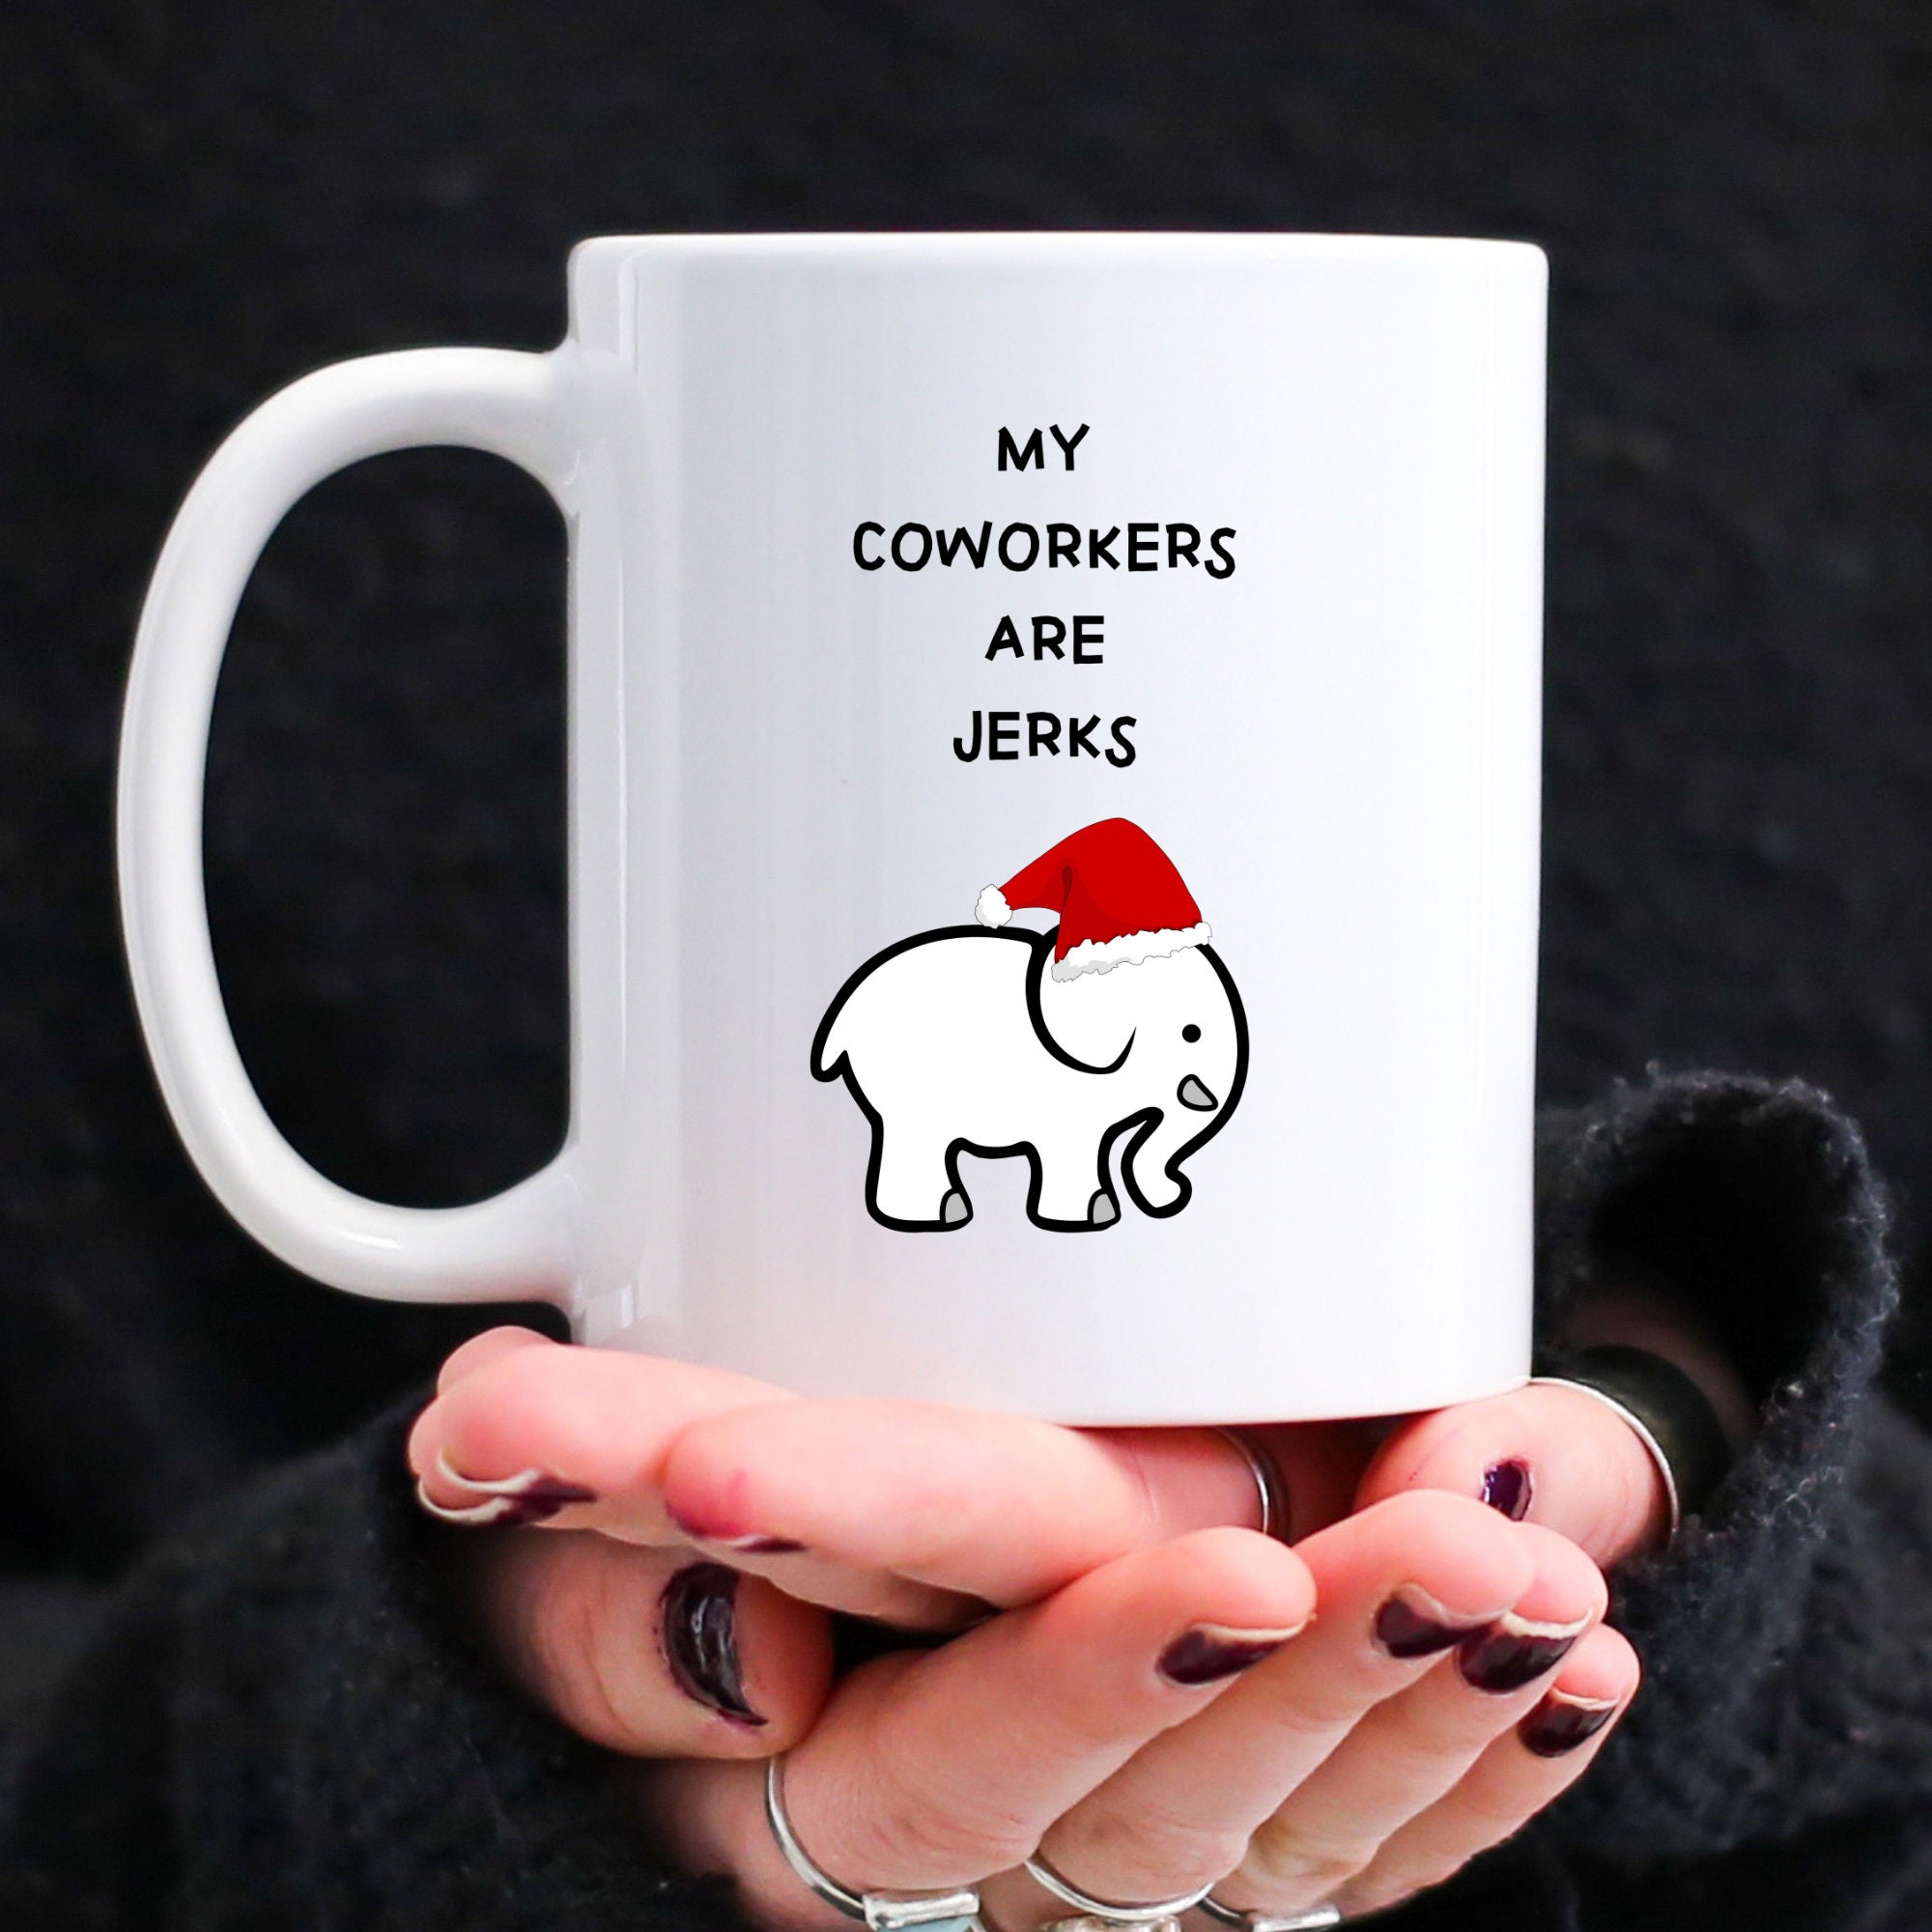 40 Funny White Elephant Gifts to Bring on the Laughs — Sugar & Cloth